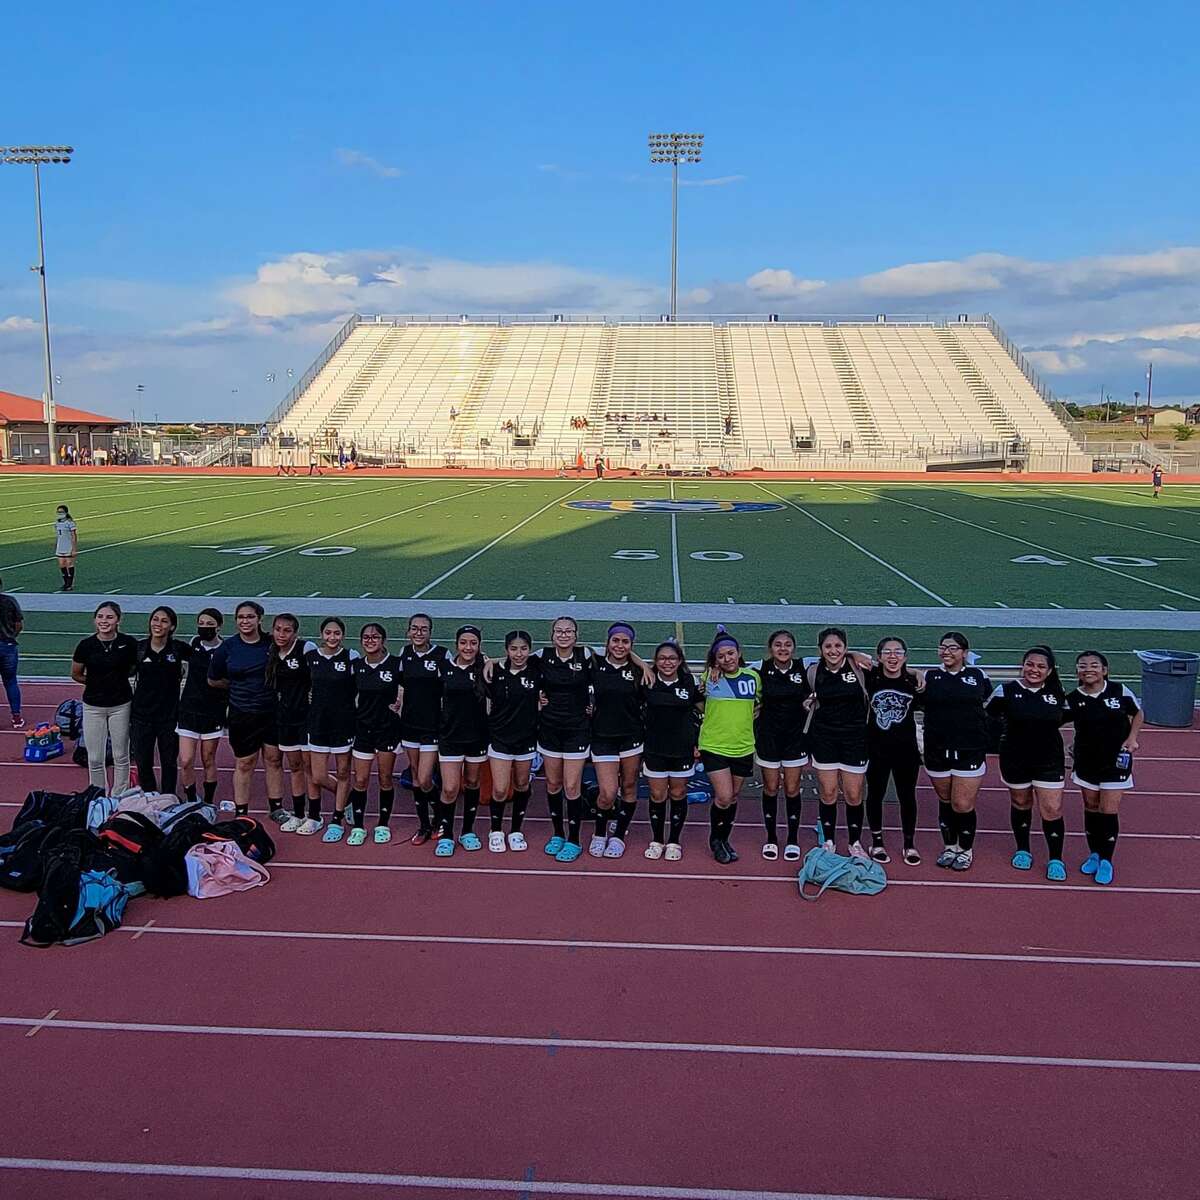 The United South Middle School girls’ soccer team won the UISD middle school title this season.